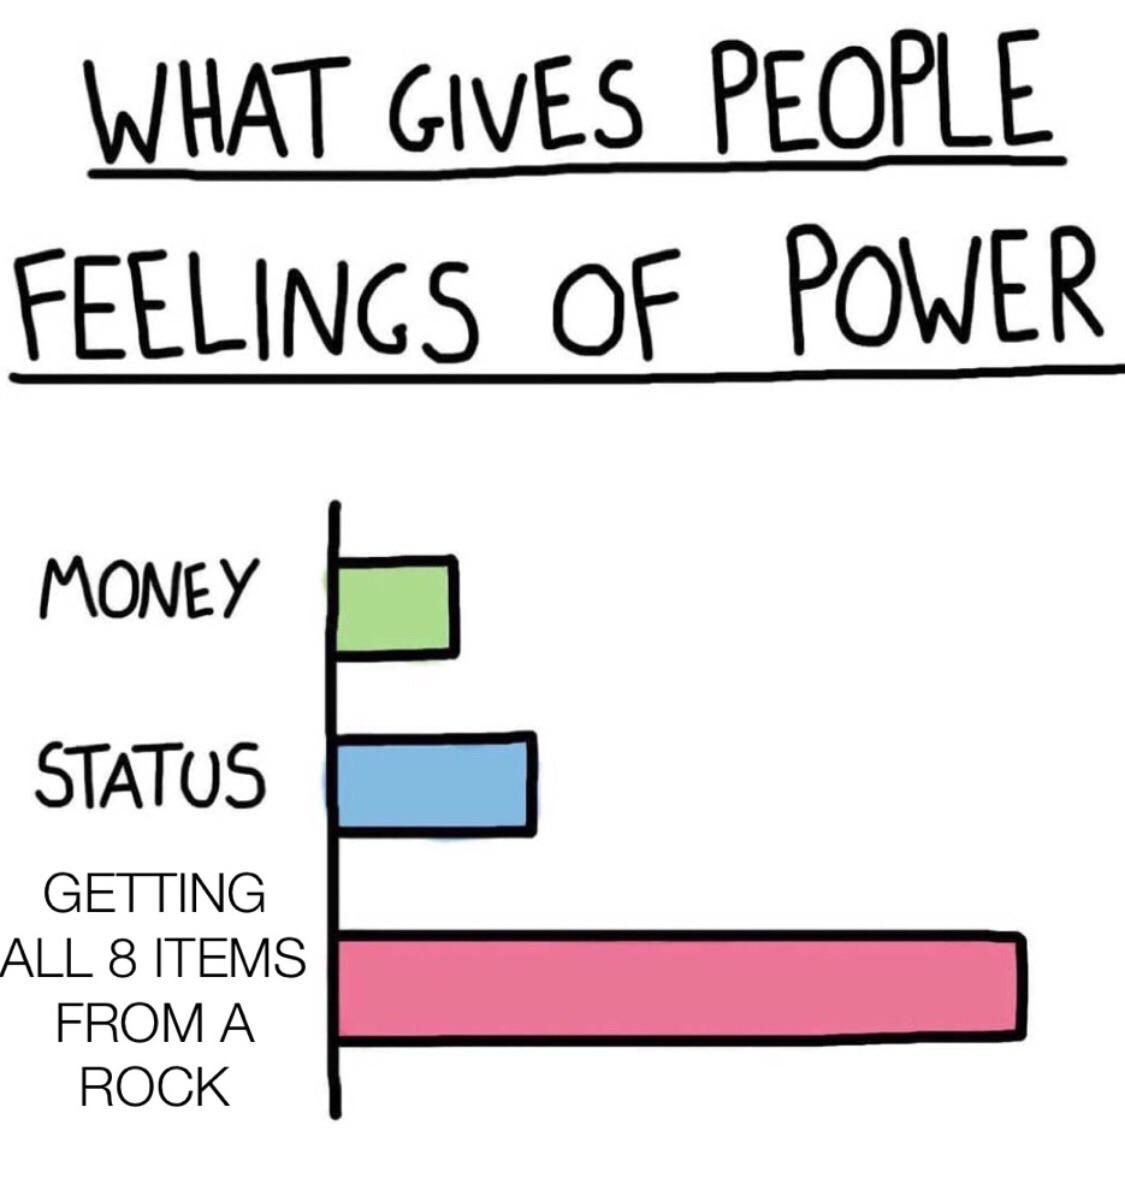 nuka dark meme - What Gives People Feelings Of Power Money Status Getting All 8 Items From A Rock